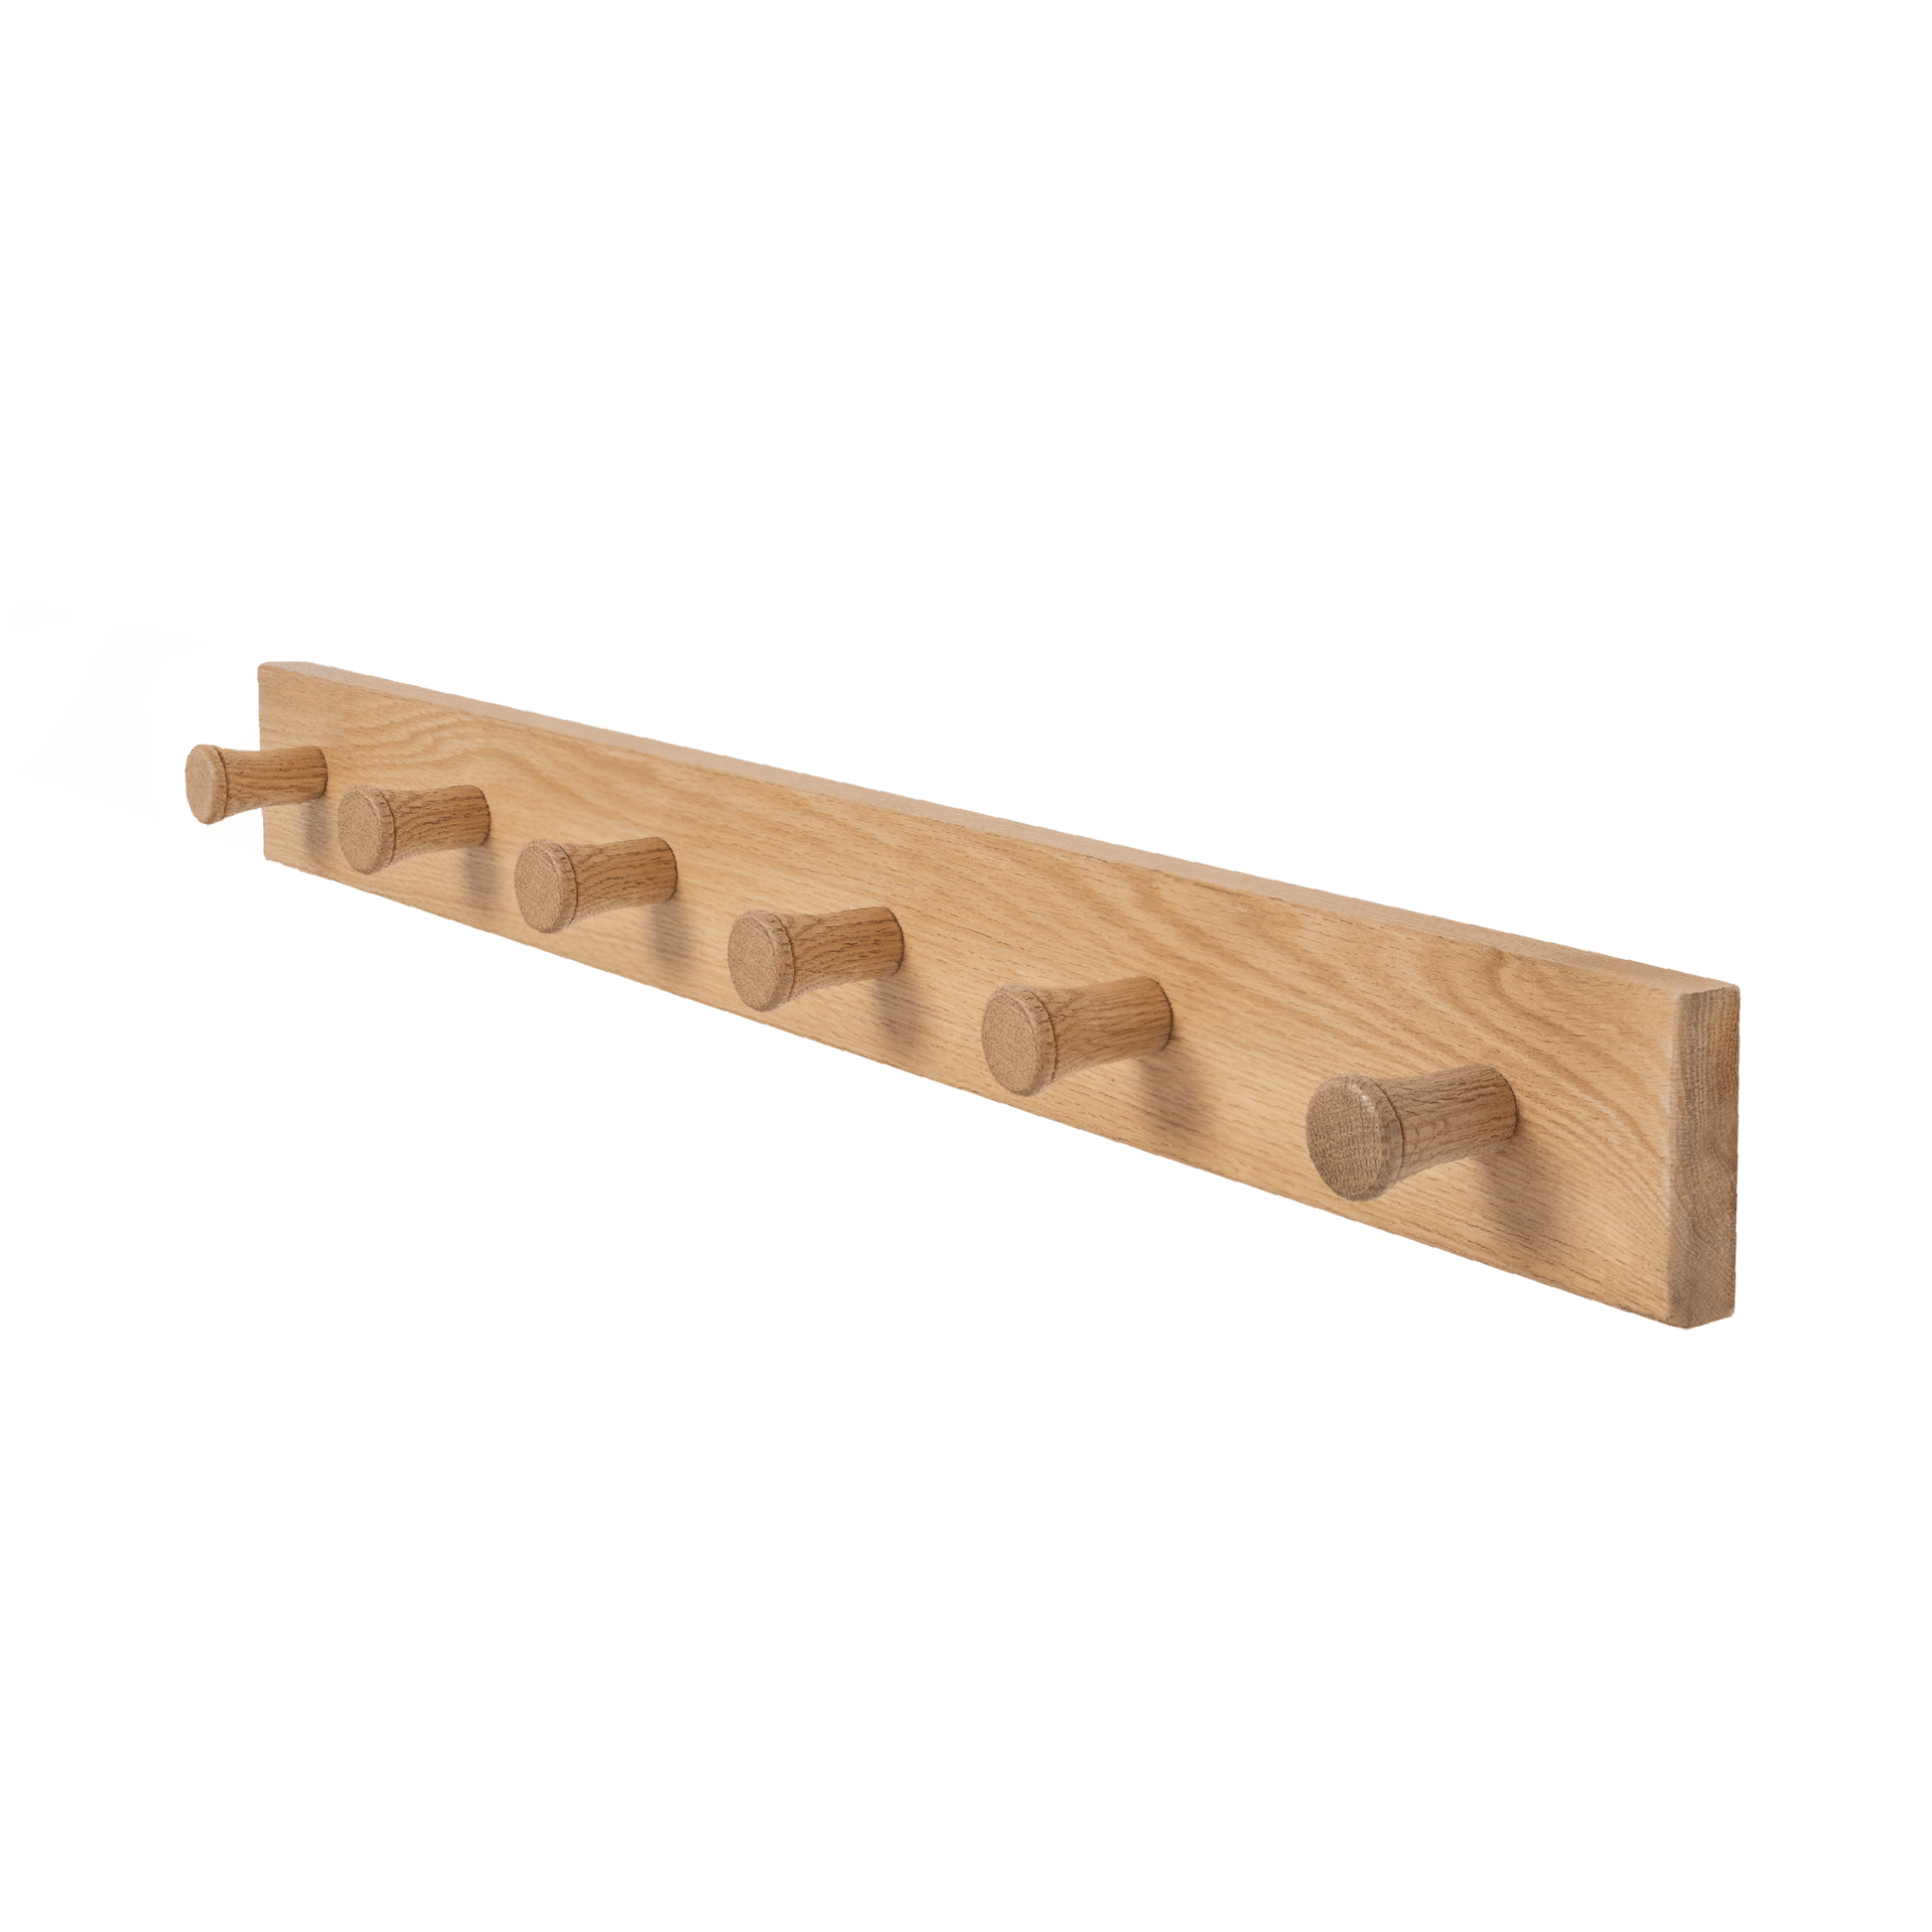 Wall Mounted Coat Hanger -Solid Oak - (6 Extra Thick Non Slip Pegs 108cm Long X 8.5cm Wide) - Hangersforless